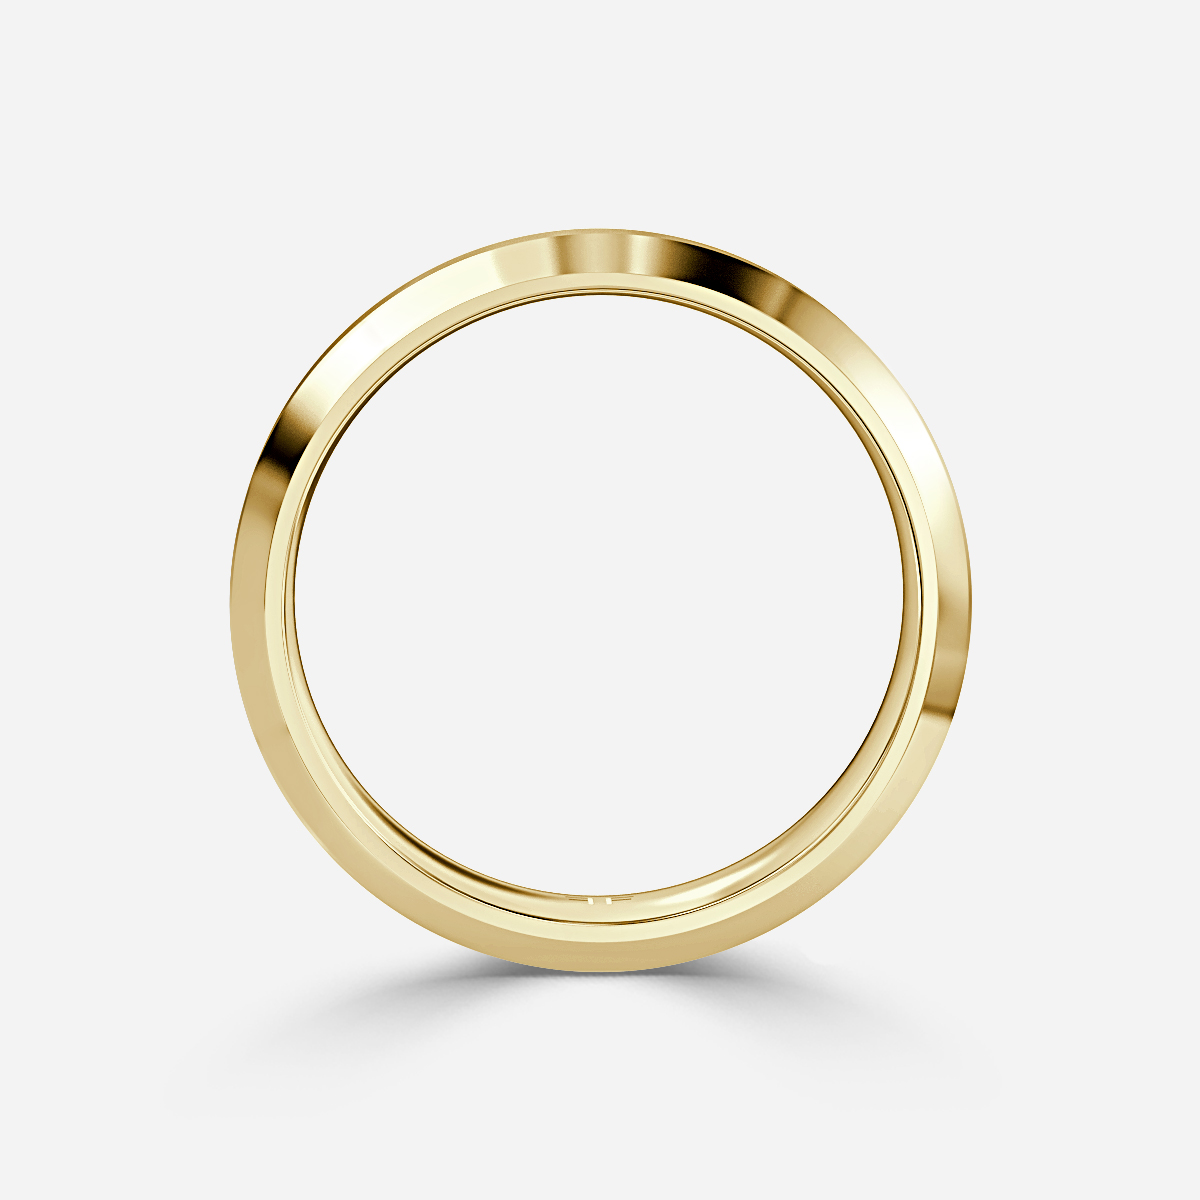 Gents 5mm Yellow Gold Wedding Ring